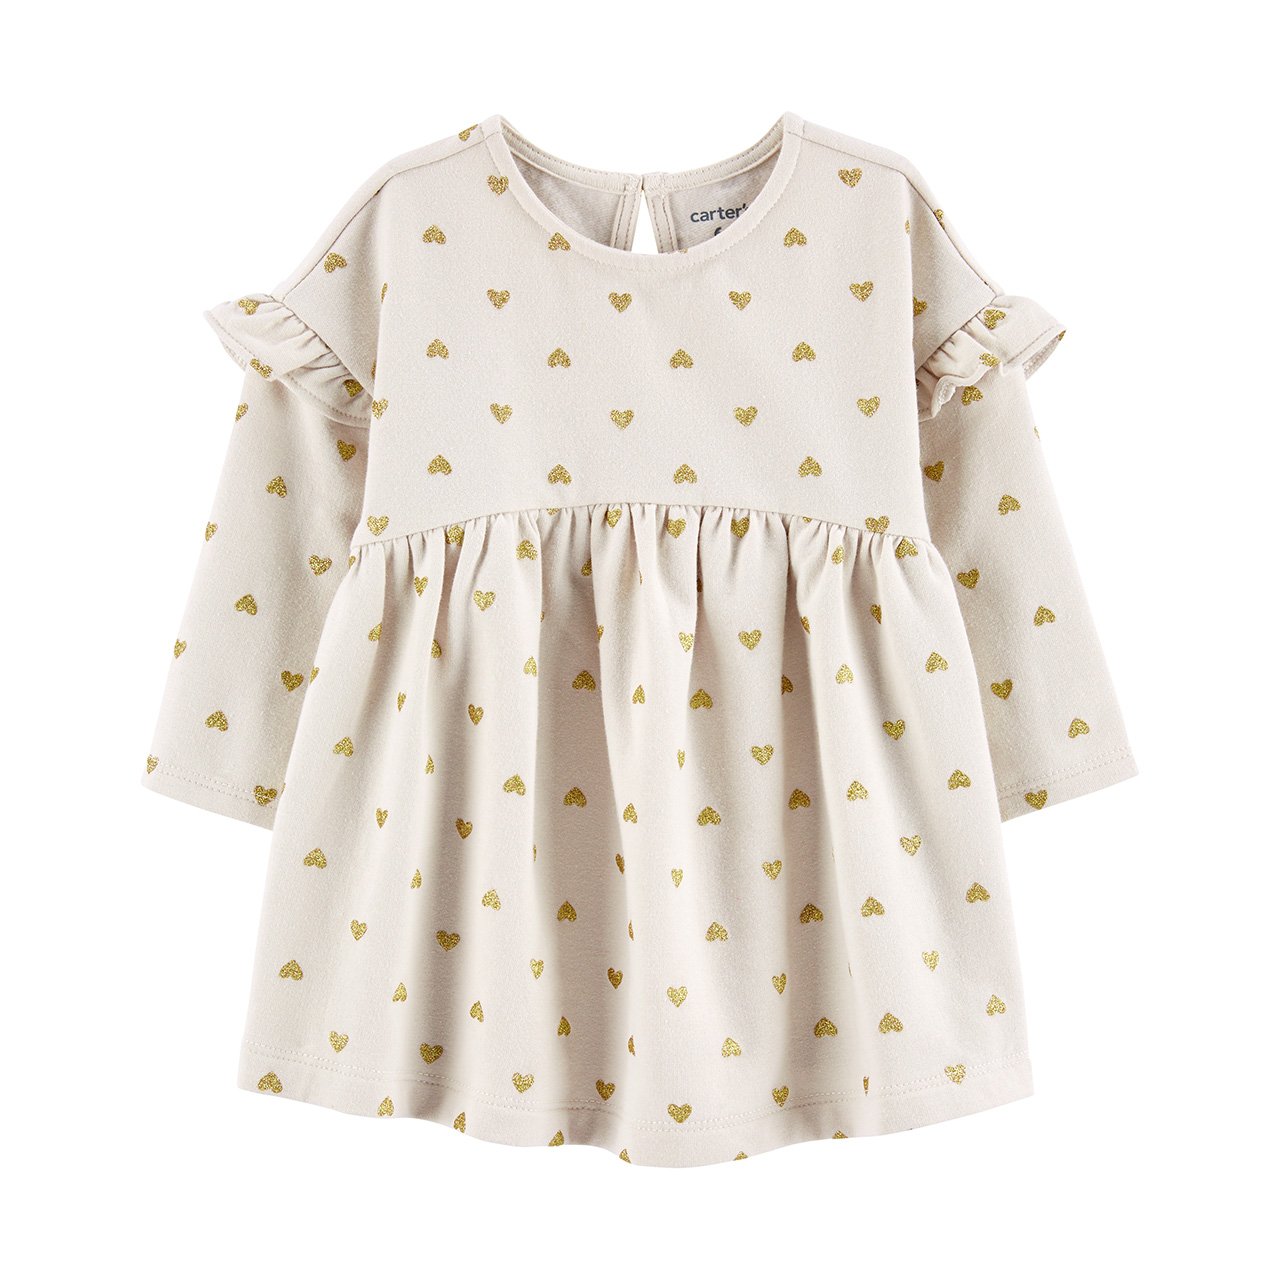 A white dress with dotted heart patterns for babies.